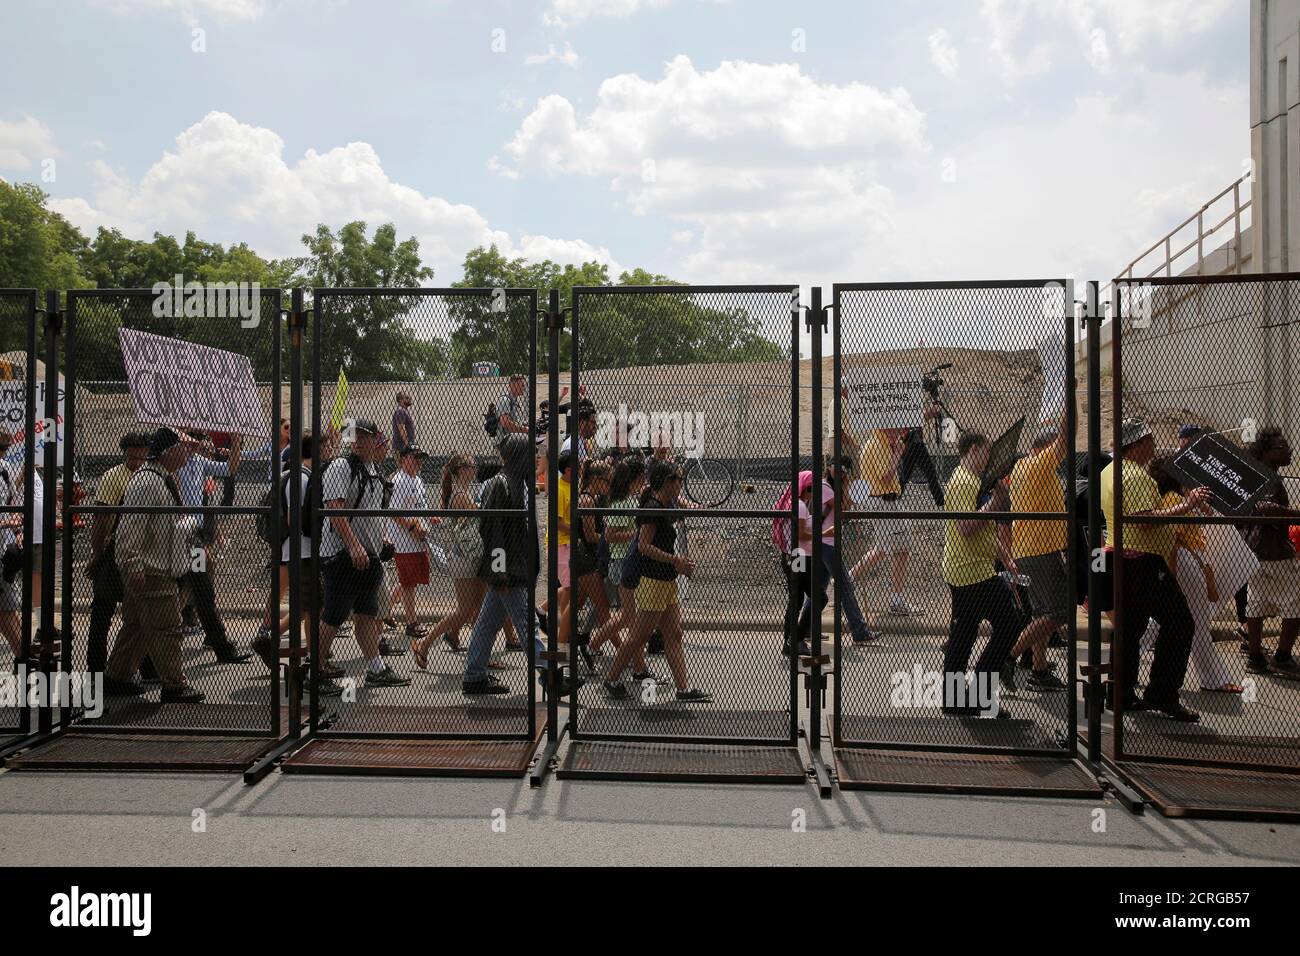 People walk behind a security fence during an anti-Trump protest to coincide with the Republican National Convention in Cleveland, Ohio, U.S., July 21, 2016.  REUTERS/Andrew Kelly Stock Photo